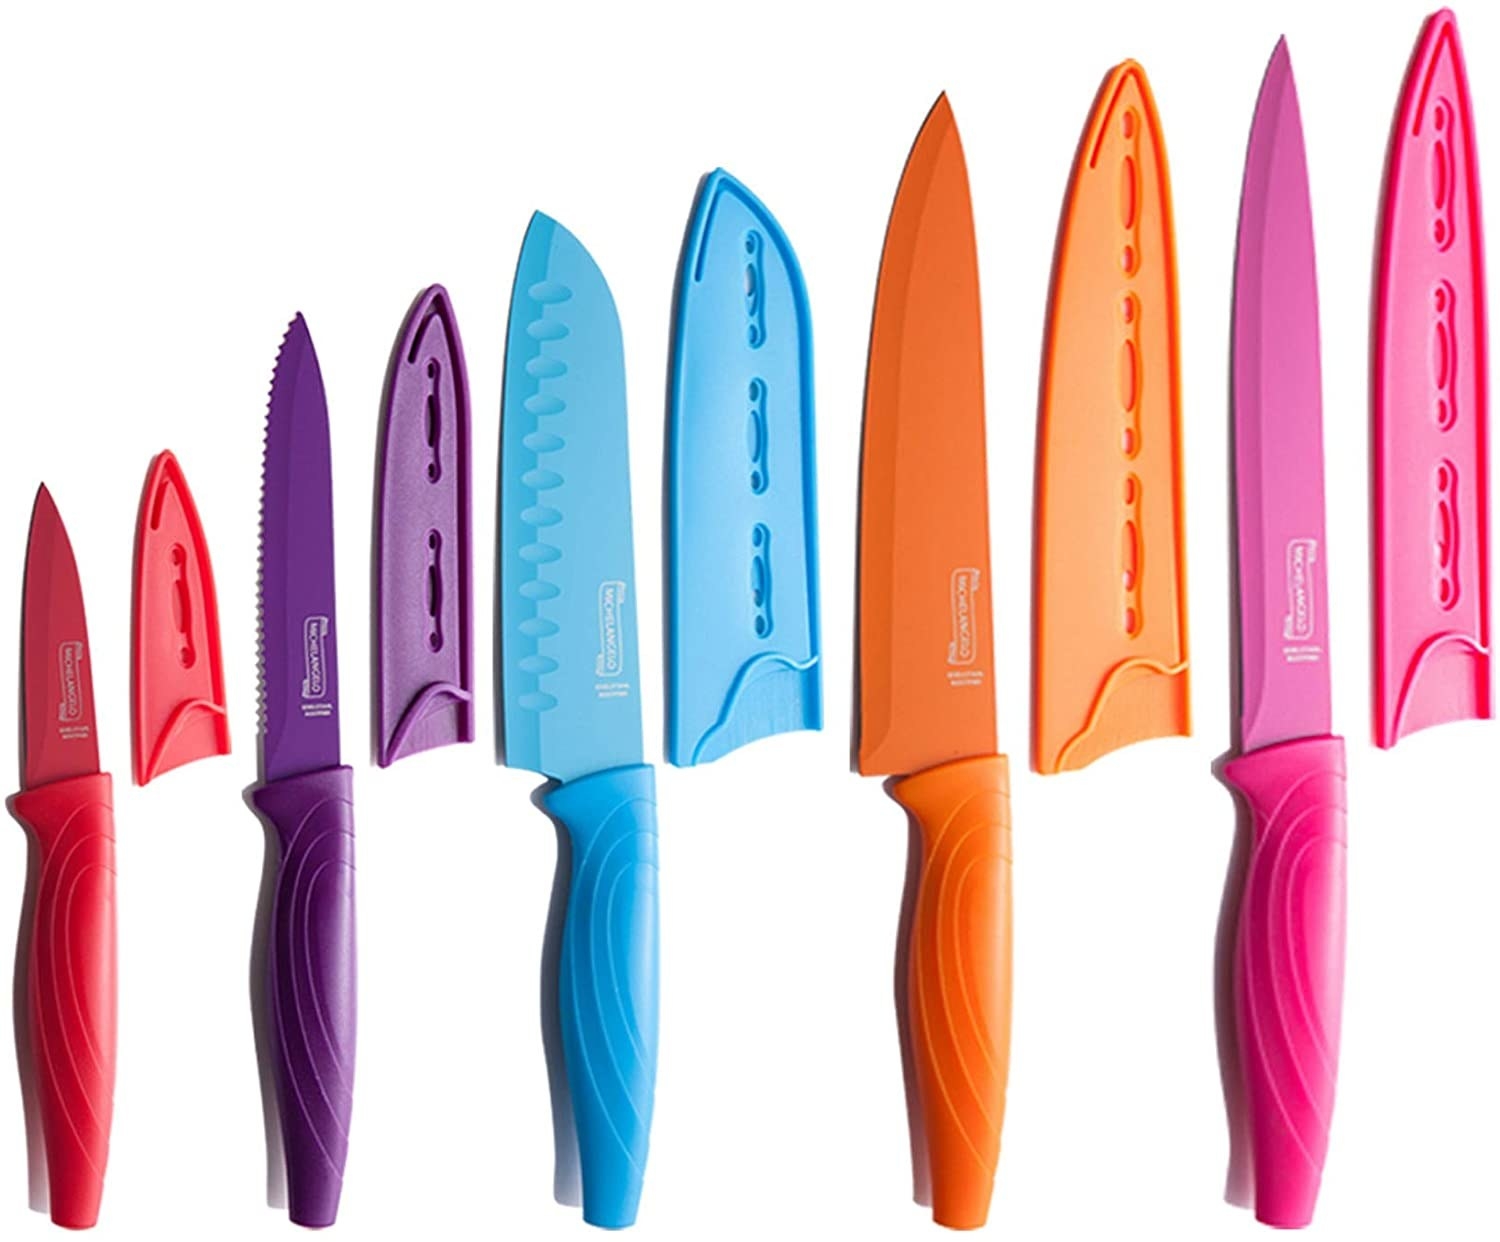 A colorful set of kitchen knives